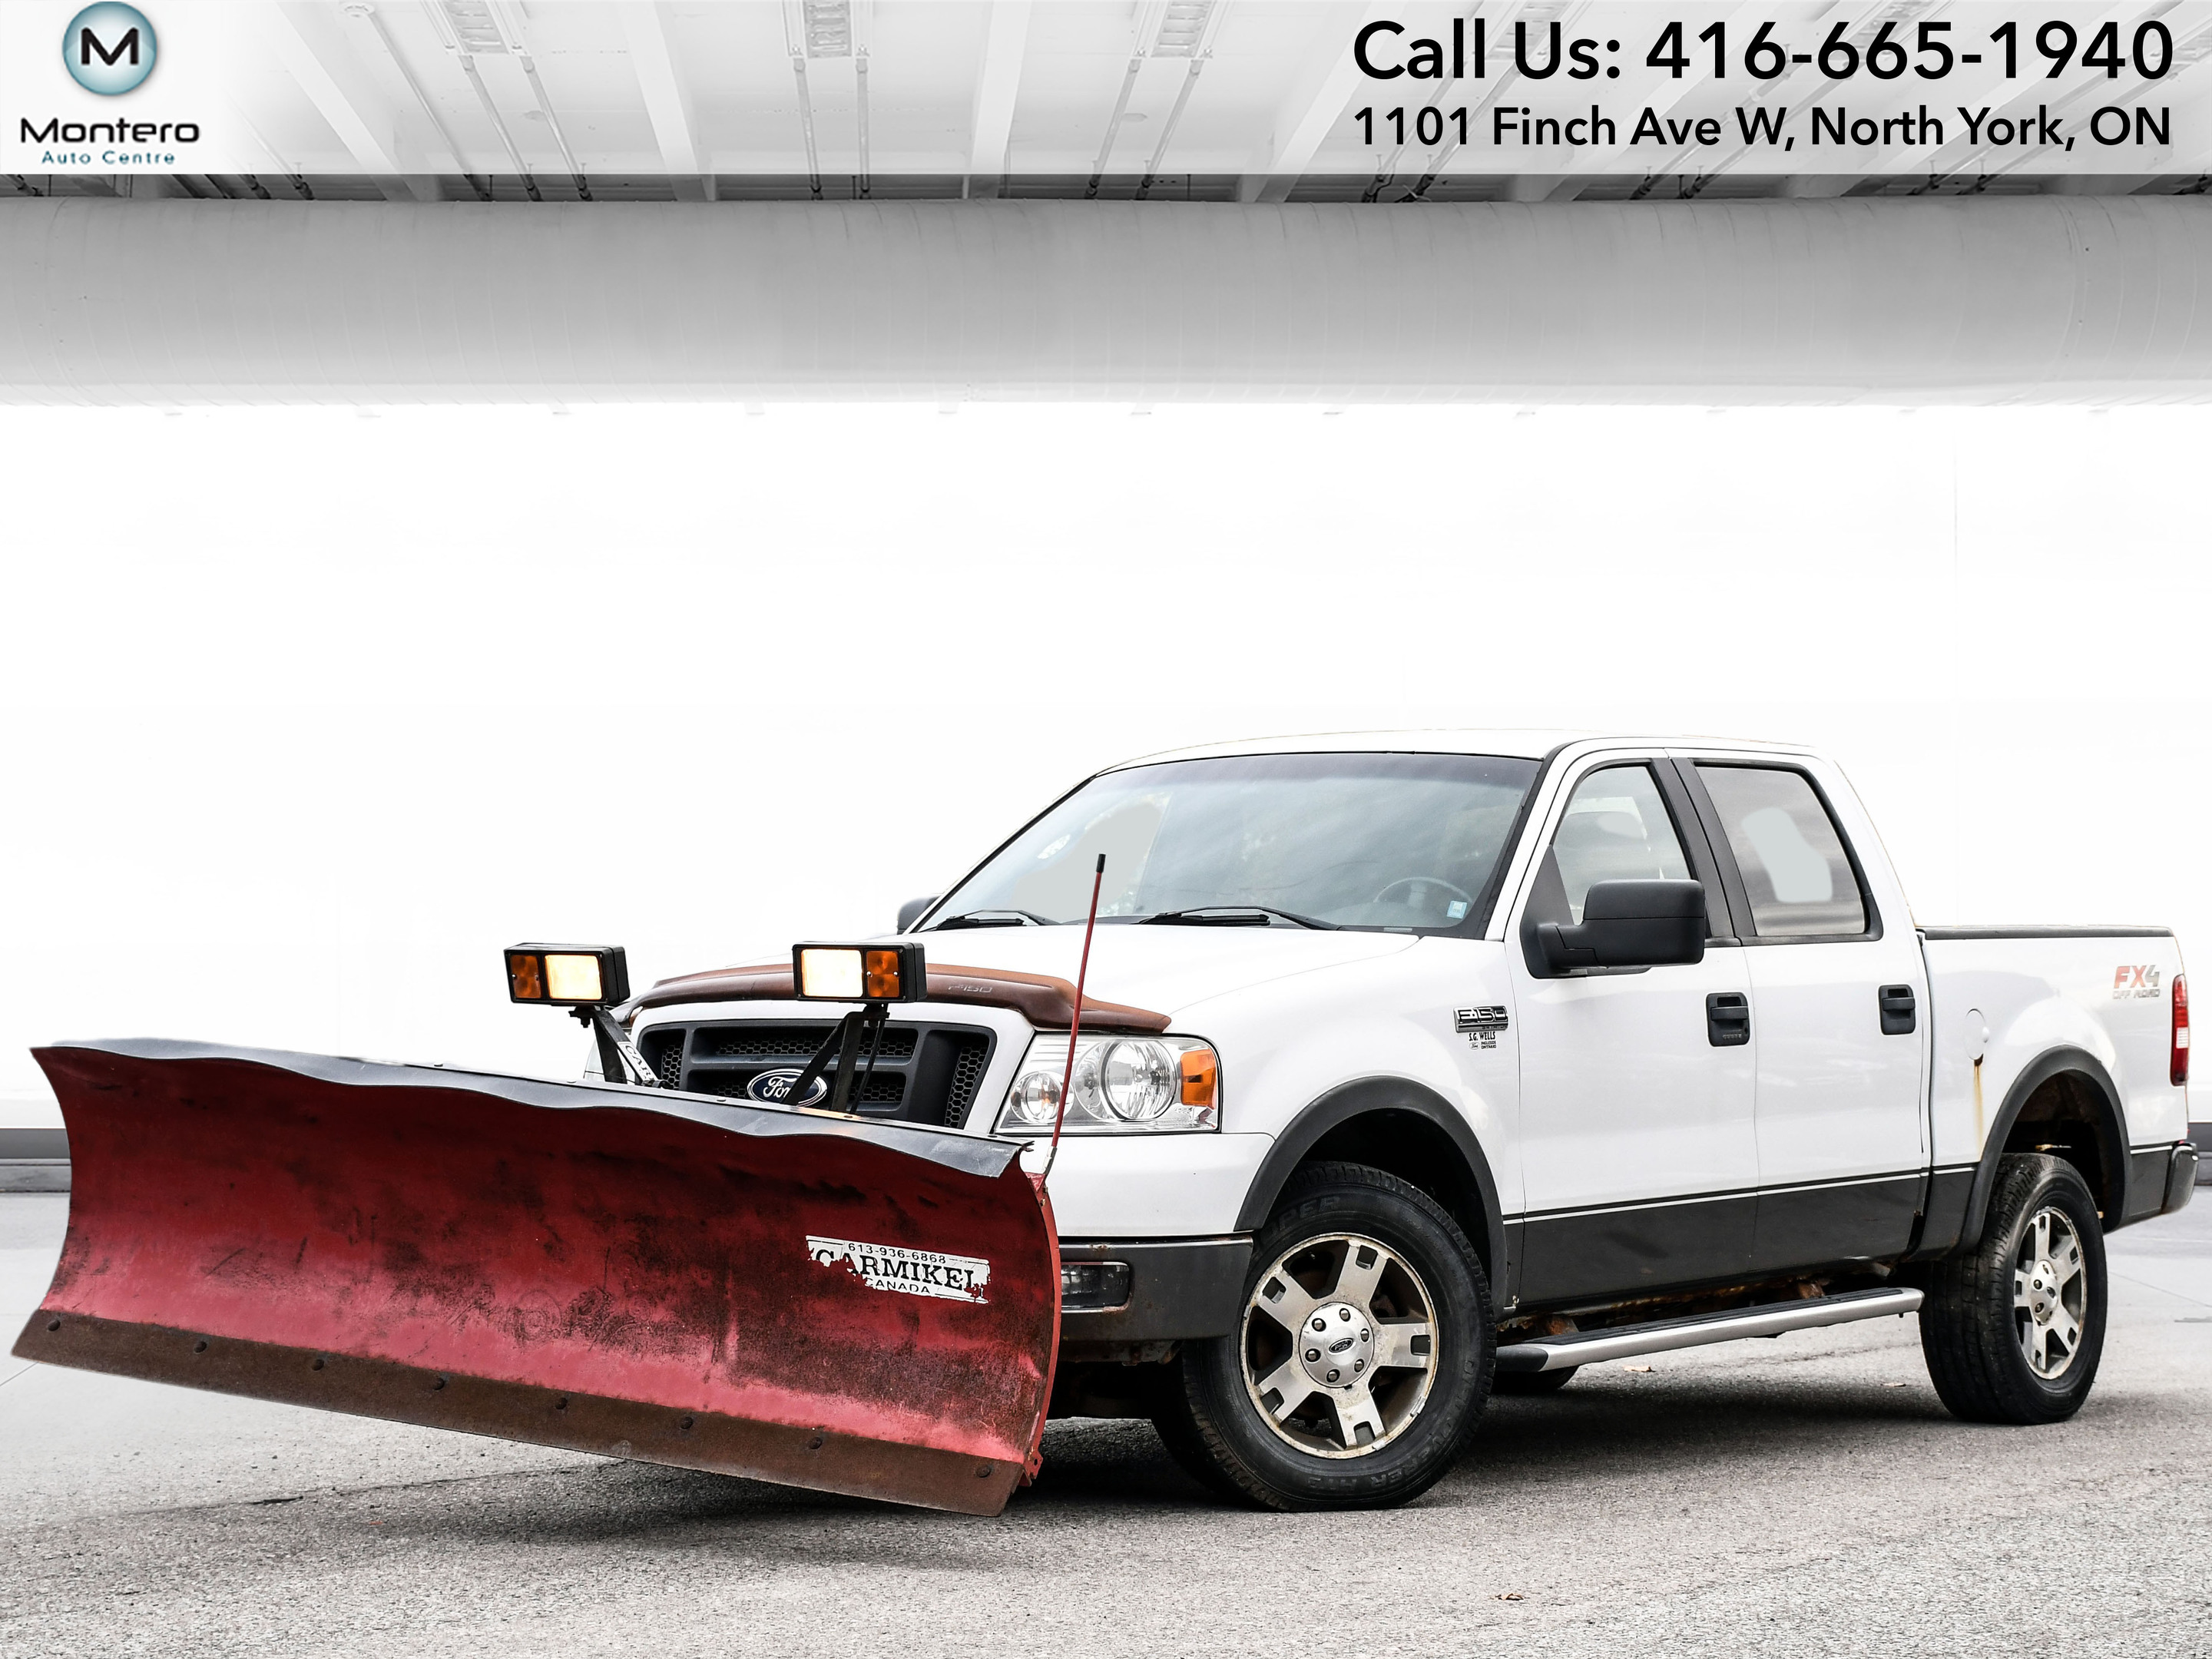 2005 Ford F-150 SuperCrew139 FX4 4WD SNOWPLOW TRUCK AS-IS SPECIAL